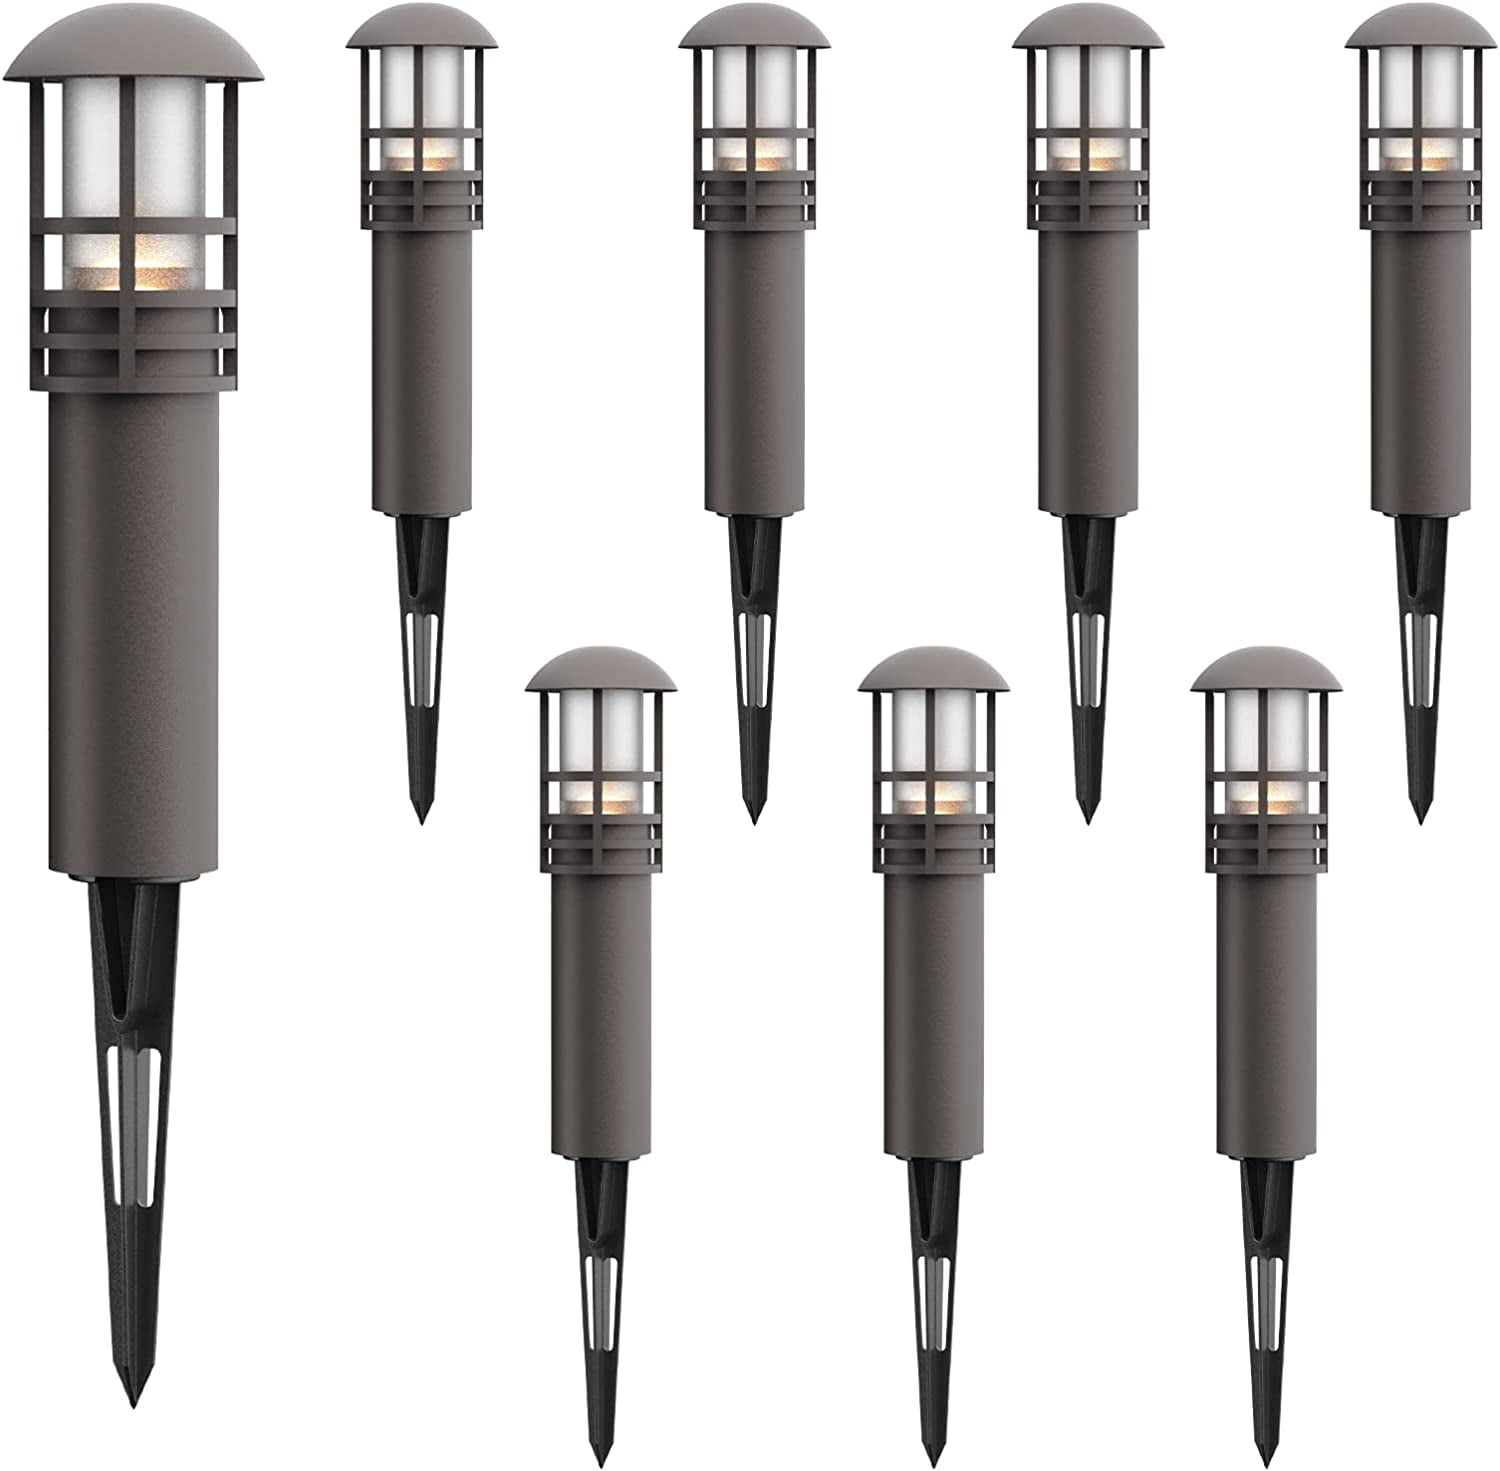 GOODSMANN Landscape Lighting Low Voltage Landscape Lights 8PK 3W LED 120  Lumen Outdoor Pathway Lights Warm White 12V AC with Metal Stake Cable  Connector 9126-43201-08A